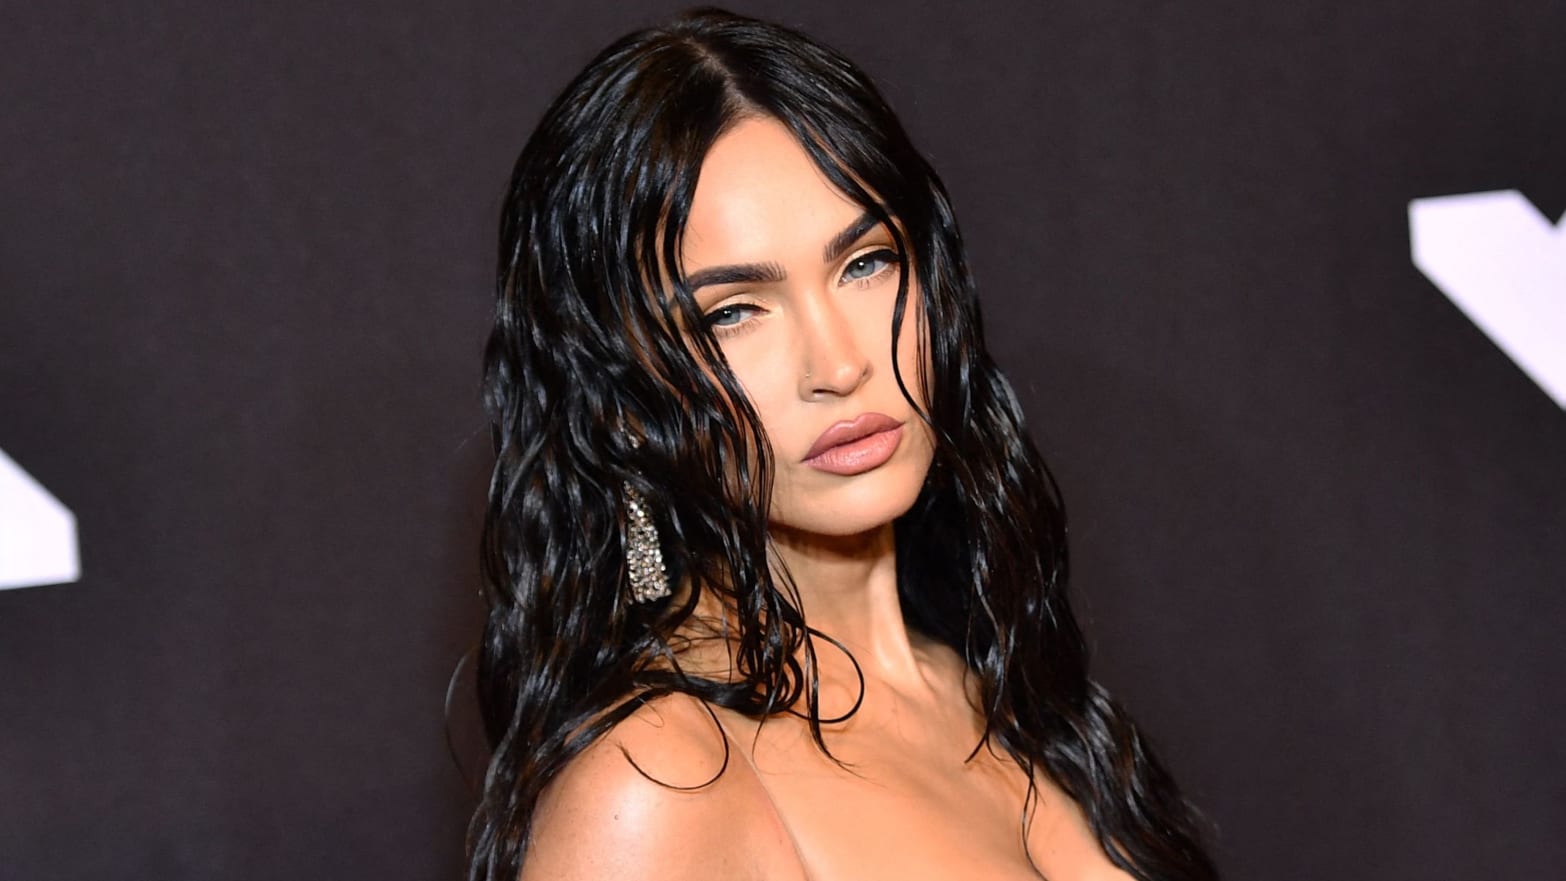 Adult Porno Megan Fox - Megan Fox Gets In on the Viral 'Euphoria High' Trendâ€“and She Definitely  Looks the Part